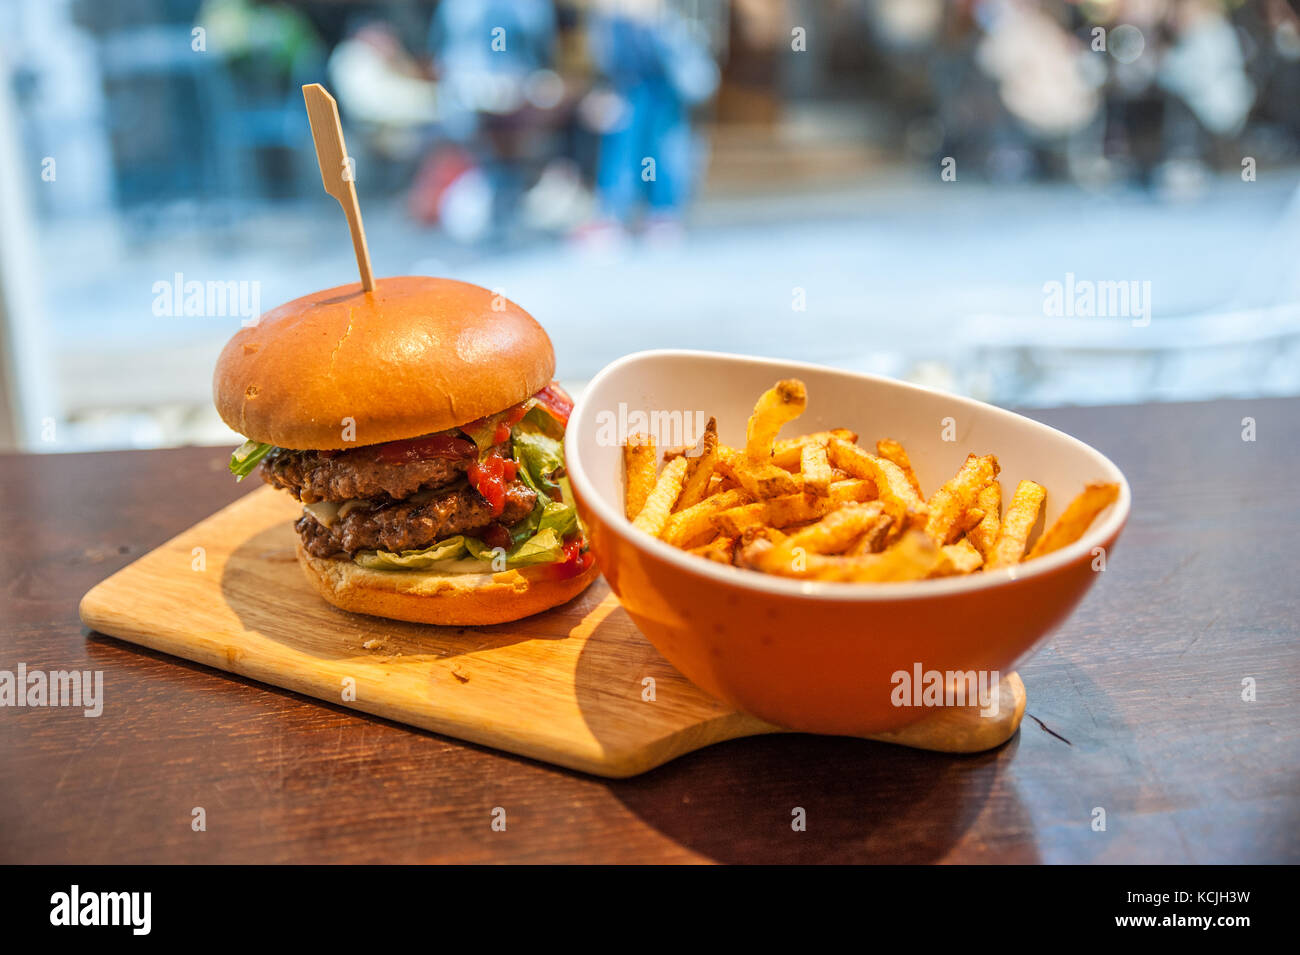 Delicious burger and french fries on the wooden chopping board Stock Photo